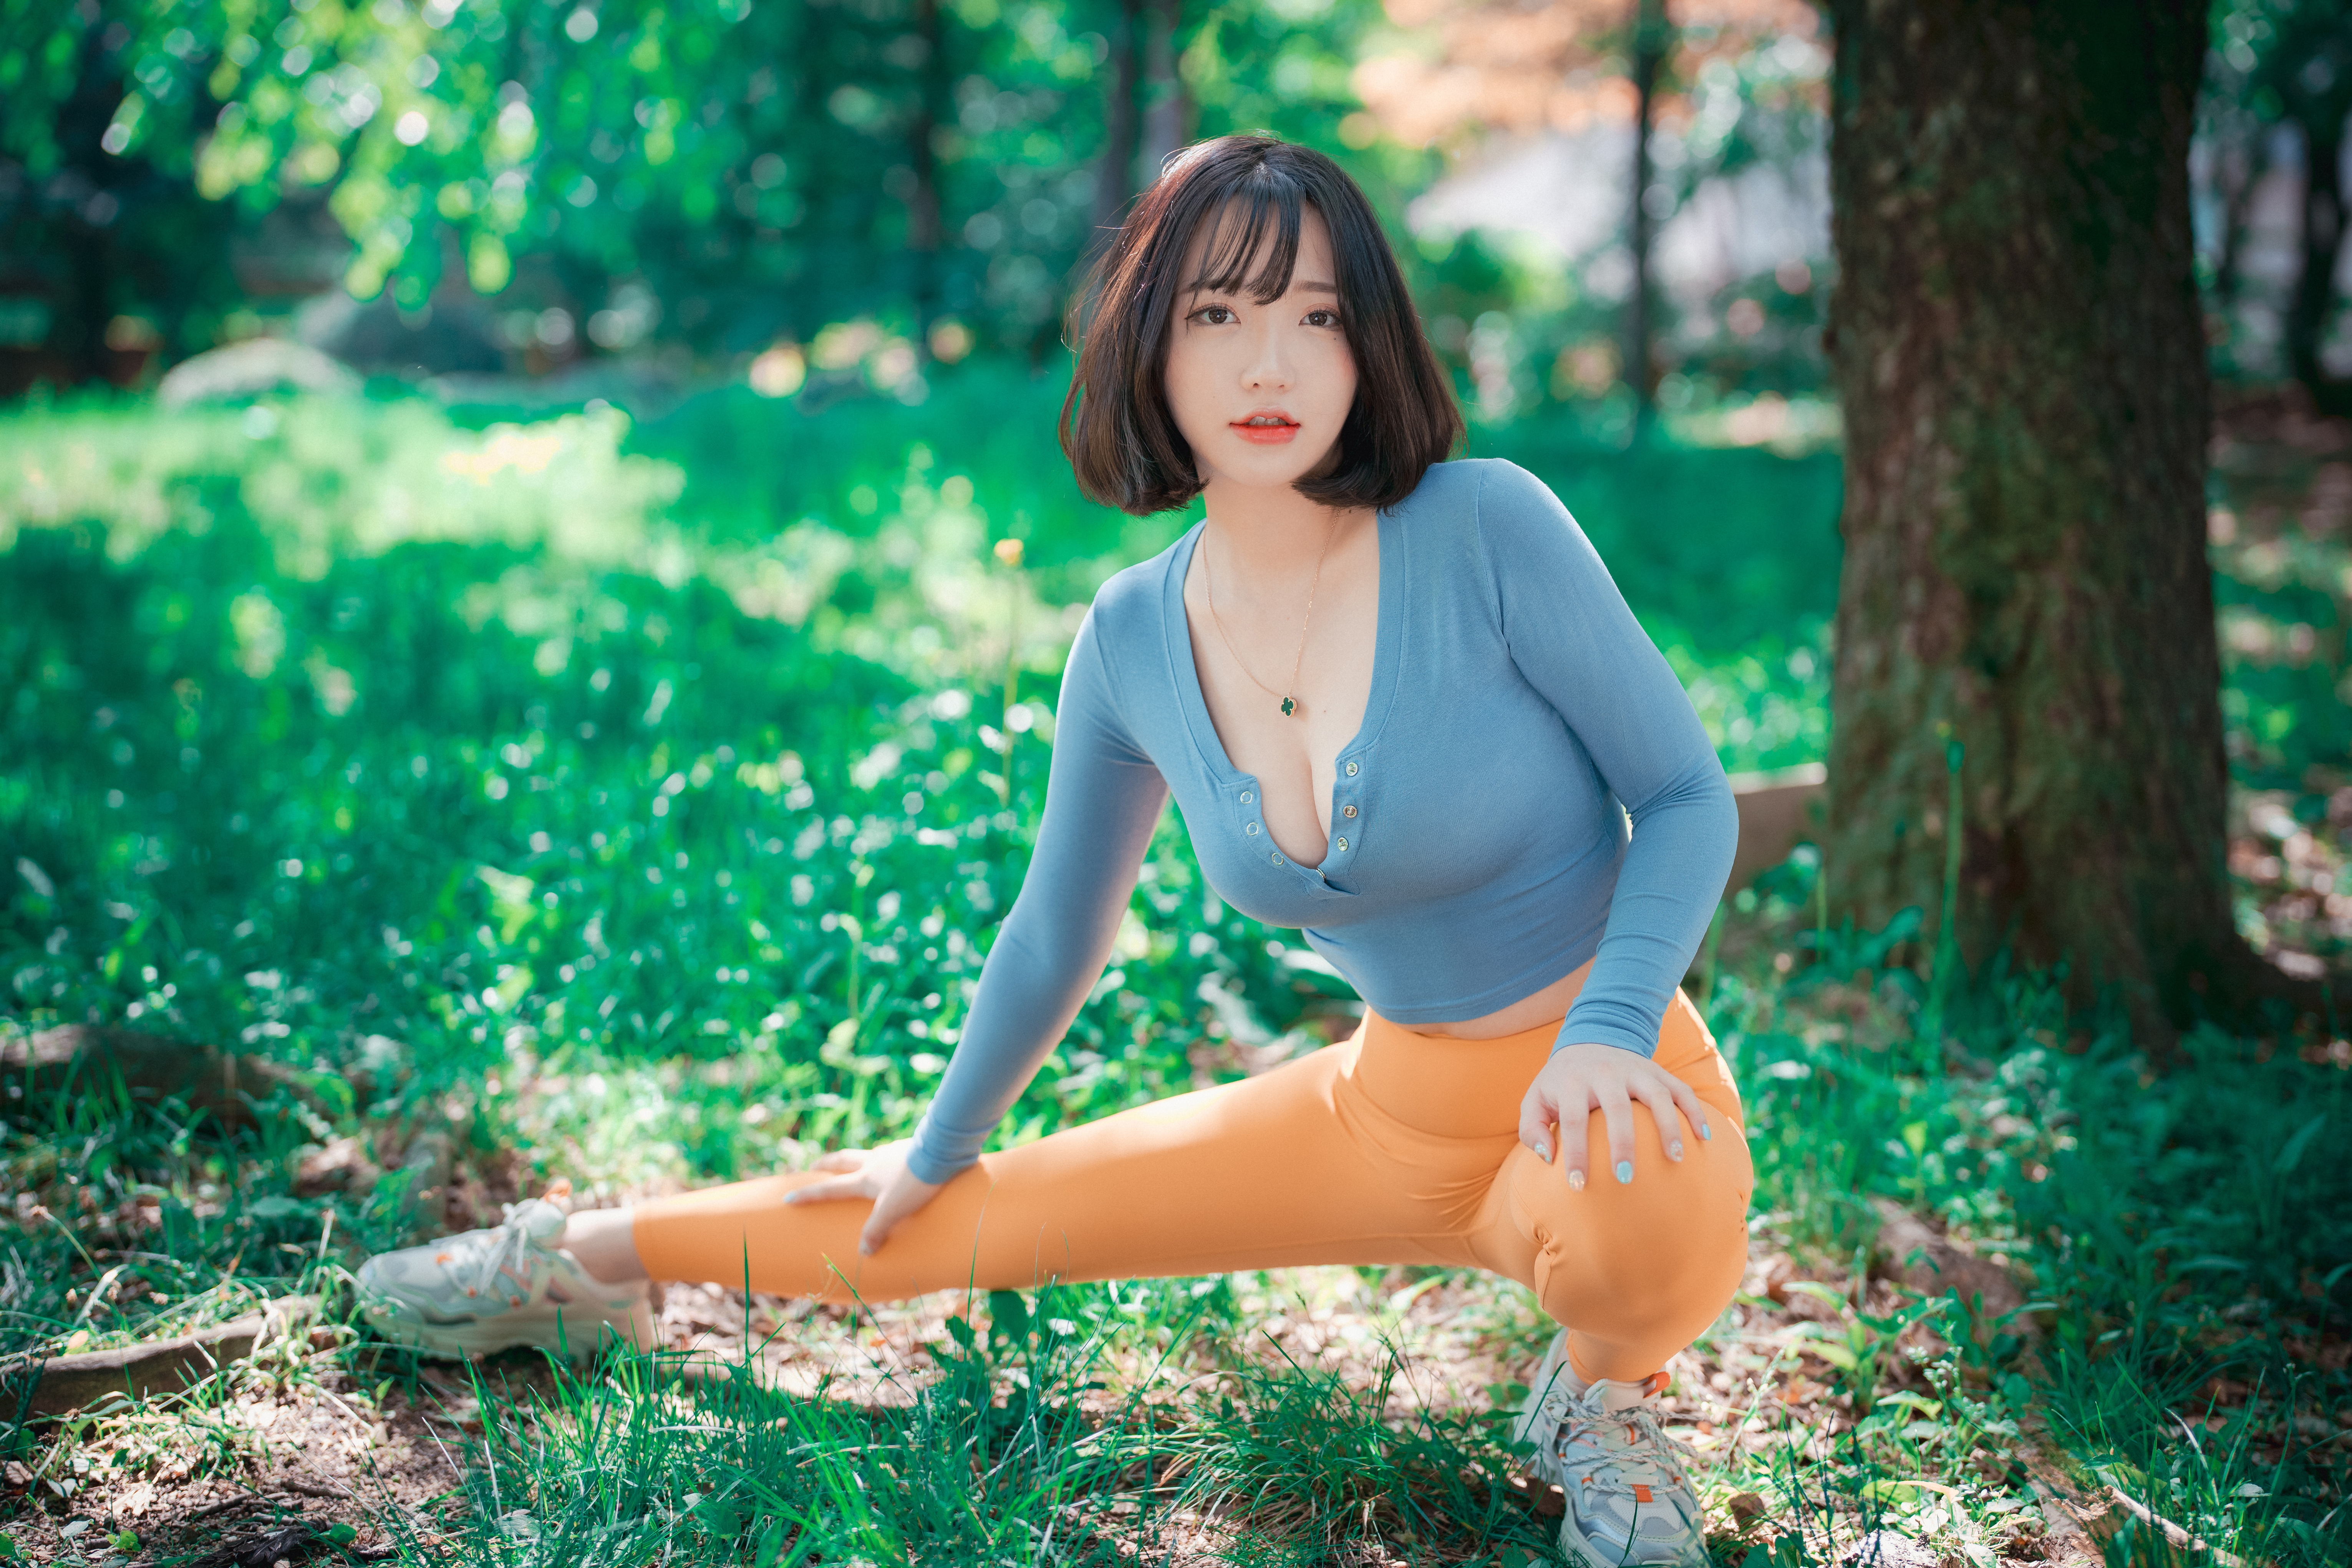 People 6123x4082 Son Ye-Eun Korean women Asian women outdoors depth of field trees grass short hair short tops cleavage spandex necklace women pale big boobs red lipstick looking at viewer black hair outdoors legs sneakers yoga pants bare midriff sunlight